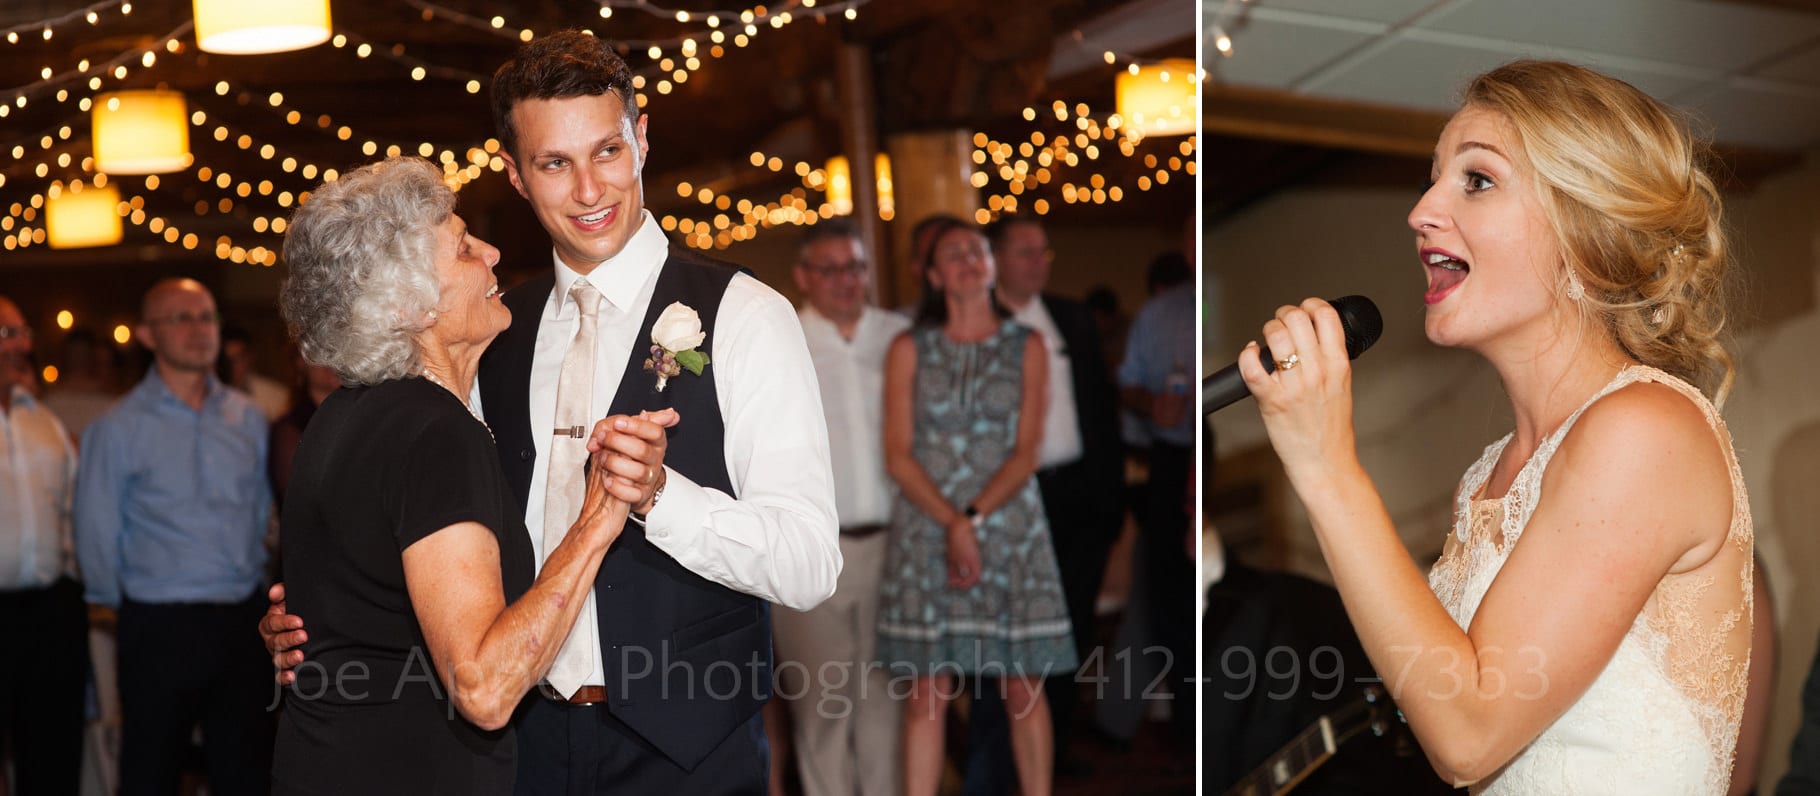 A groom dances with the grandmother of the bride while the bride sings a song for them during their Seven Springs Wedding.